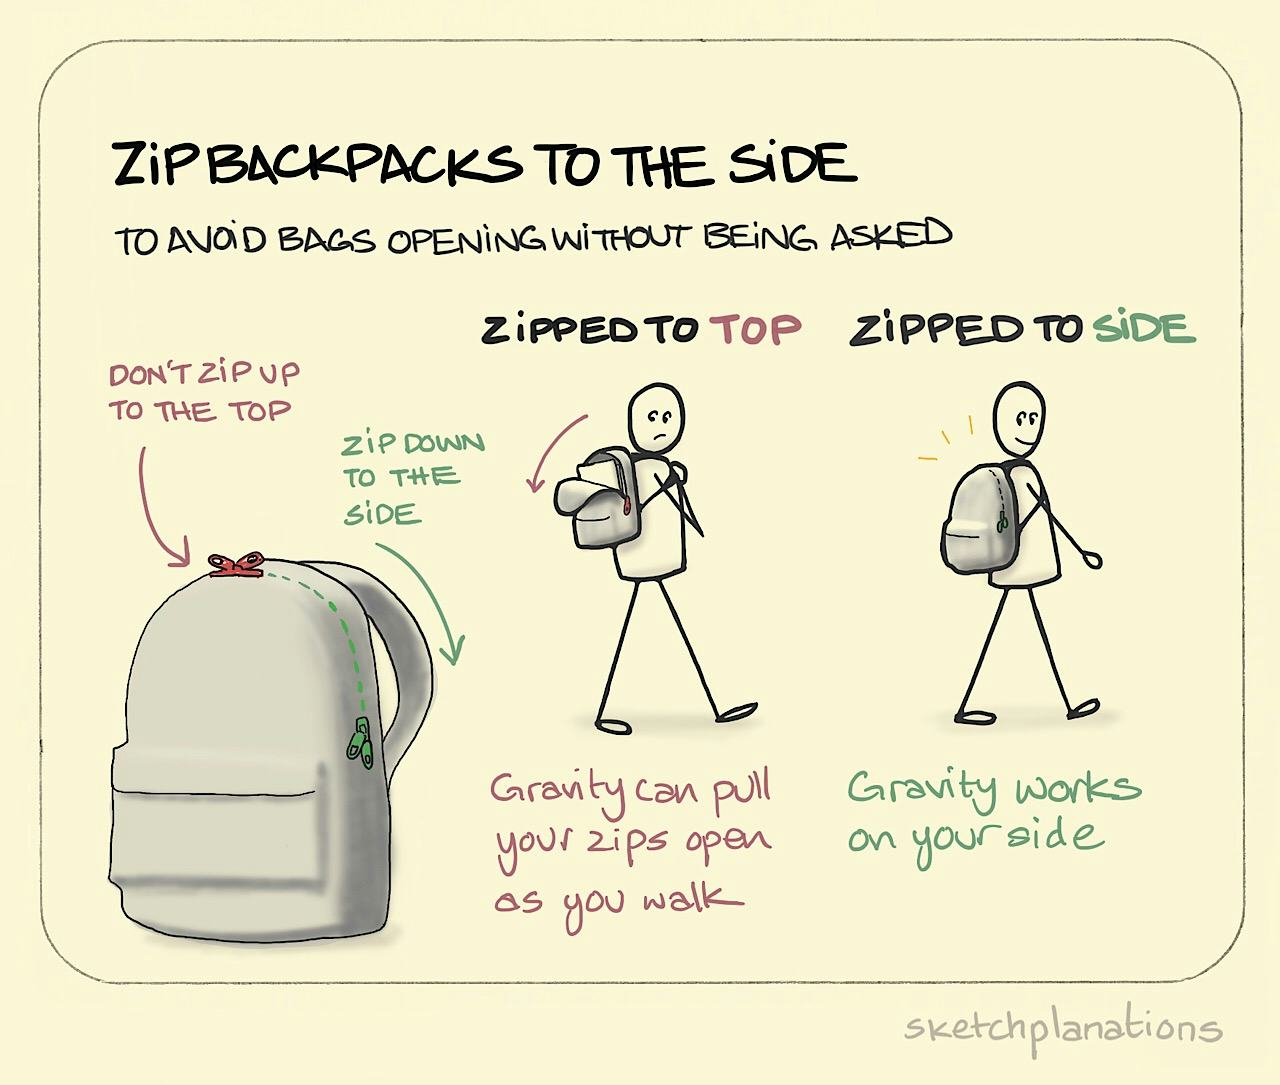 Zip backpacks to the side - Sketchplanations